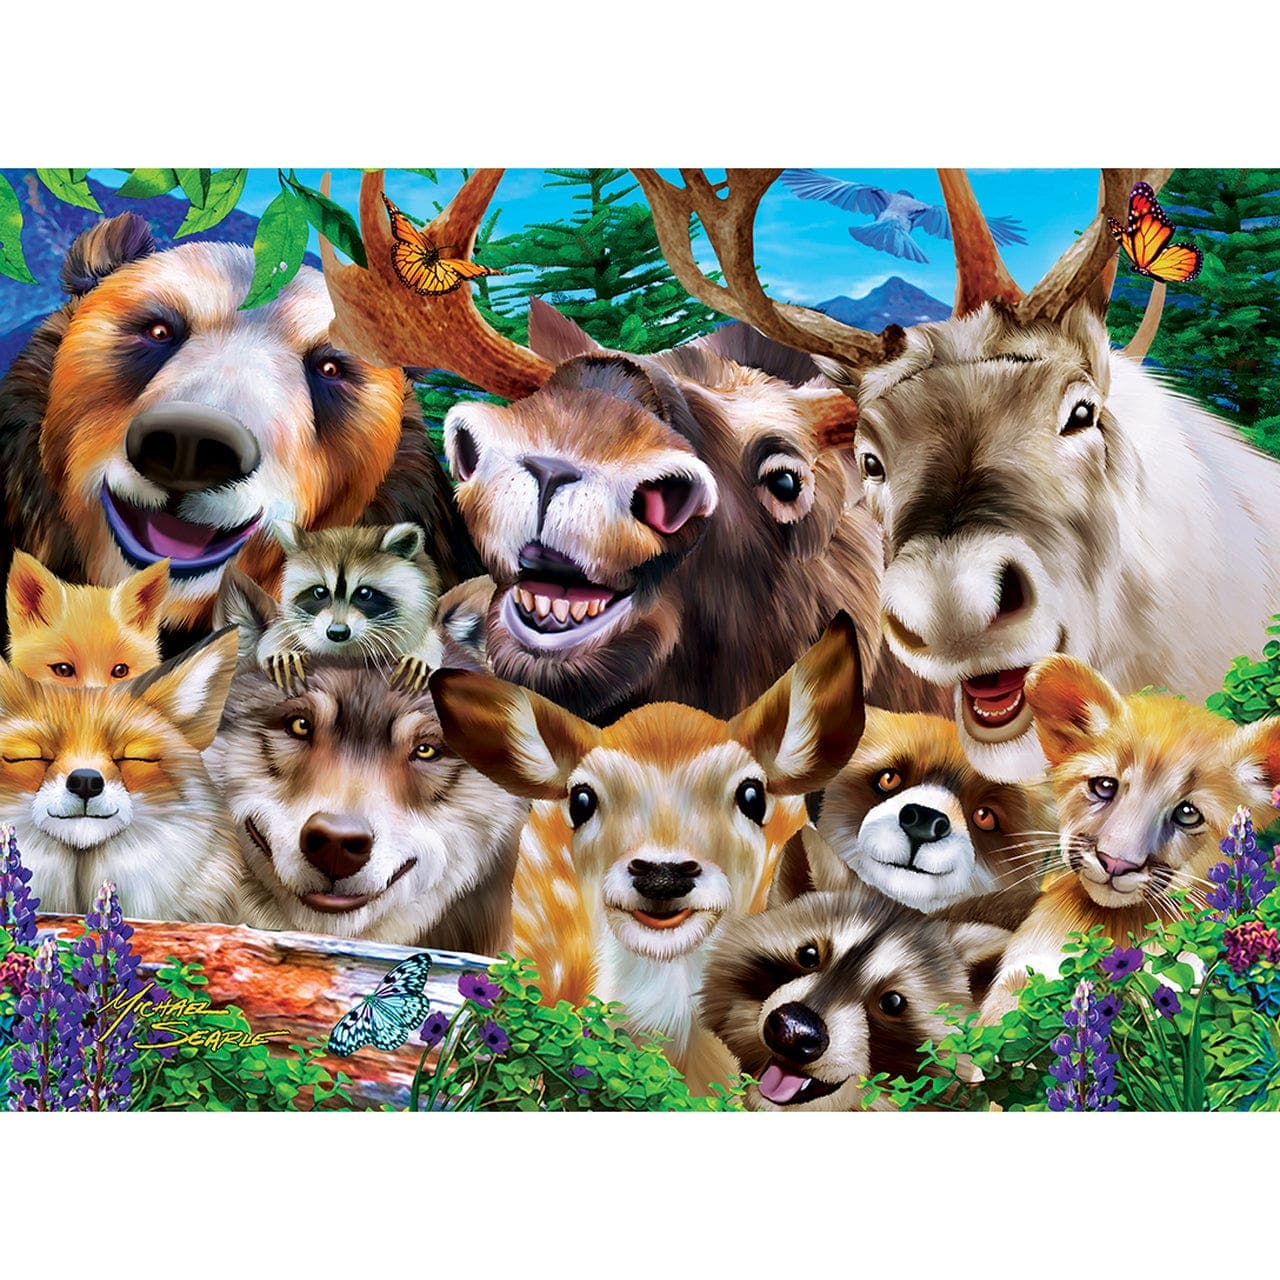 MasterPieces-Selfies - Woodland Wackiness - 200 Piece Puzzle-11916-Legacy Toys